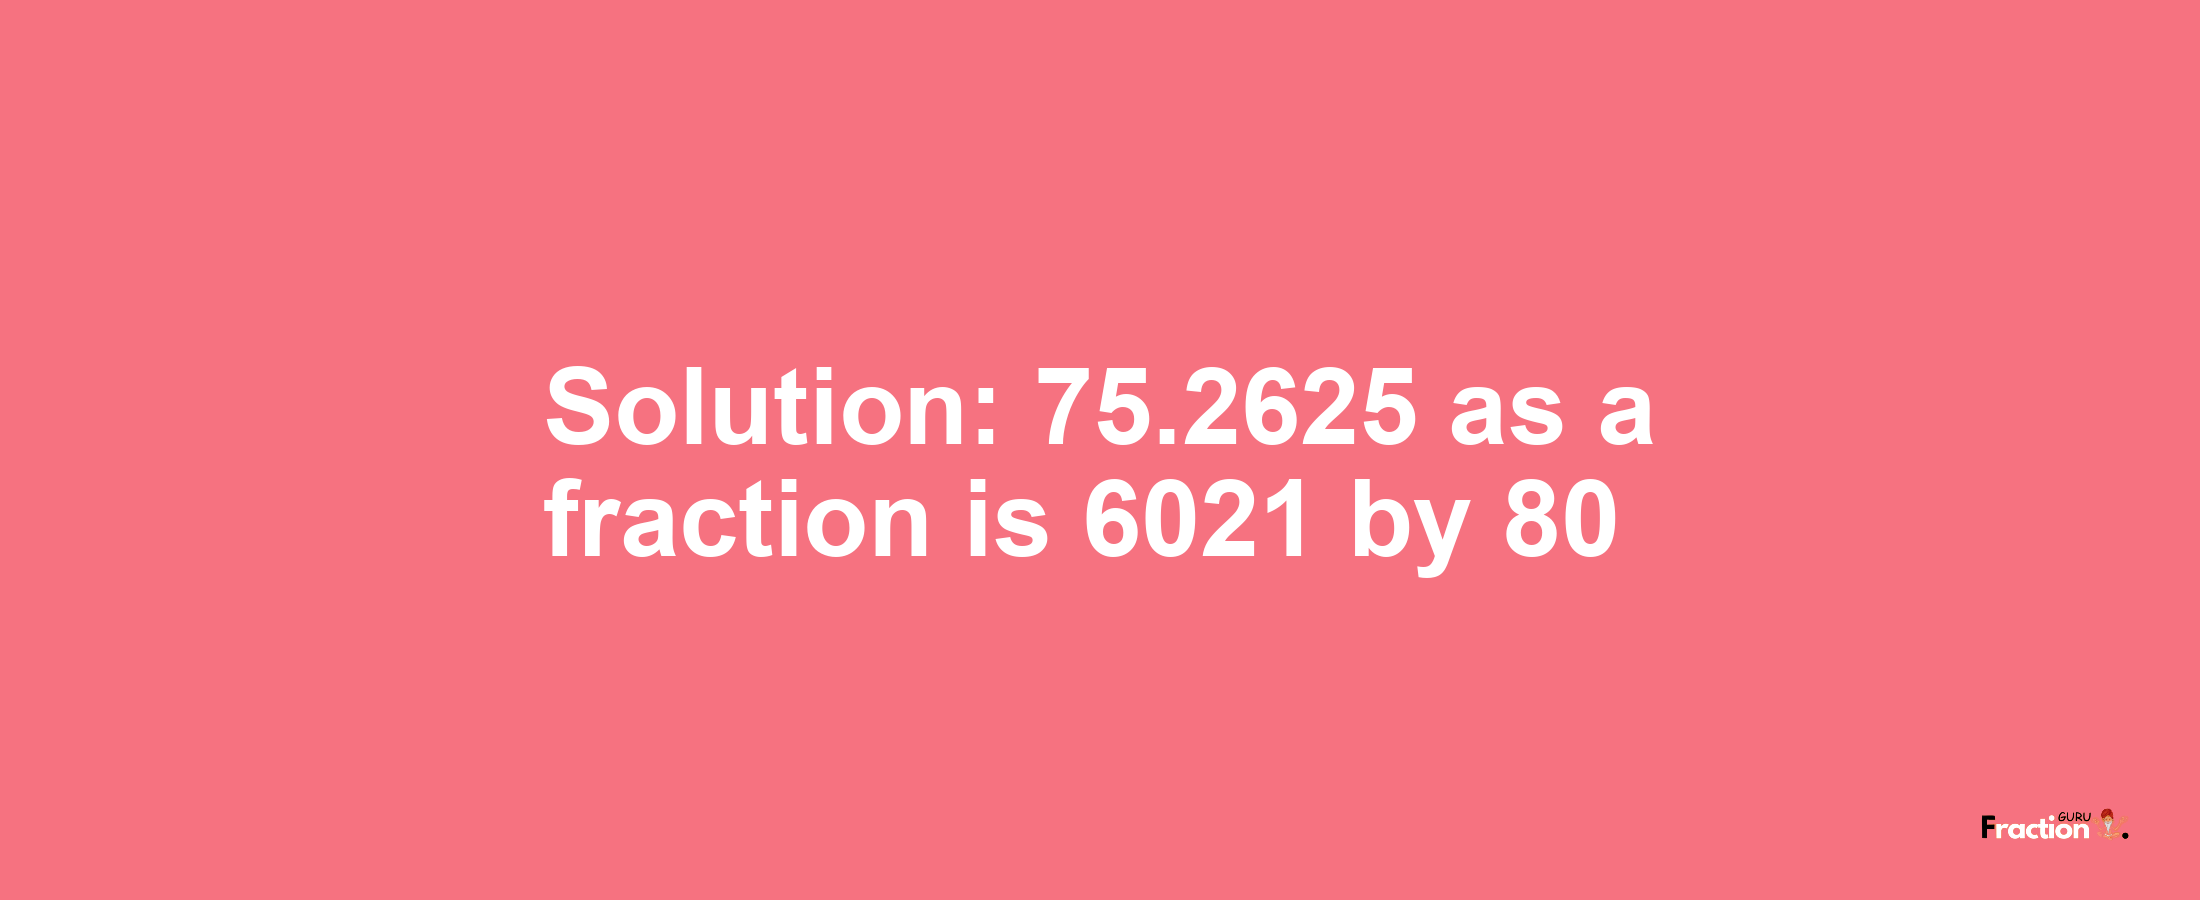 Solution:75.2625 as a fraction is 6021/80